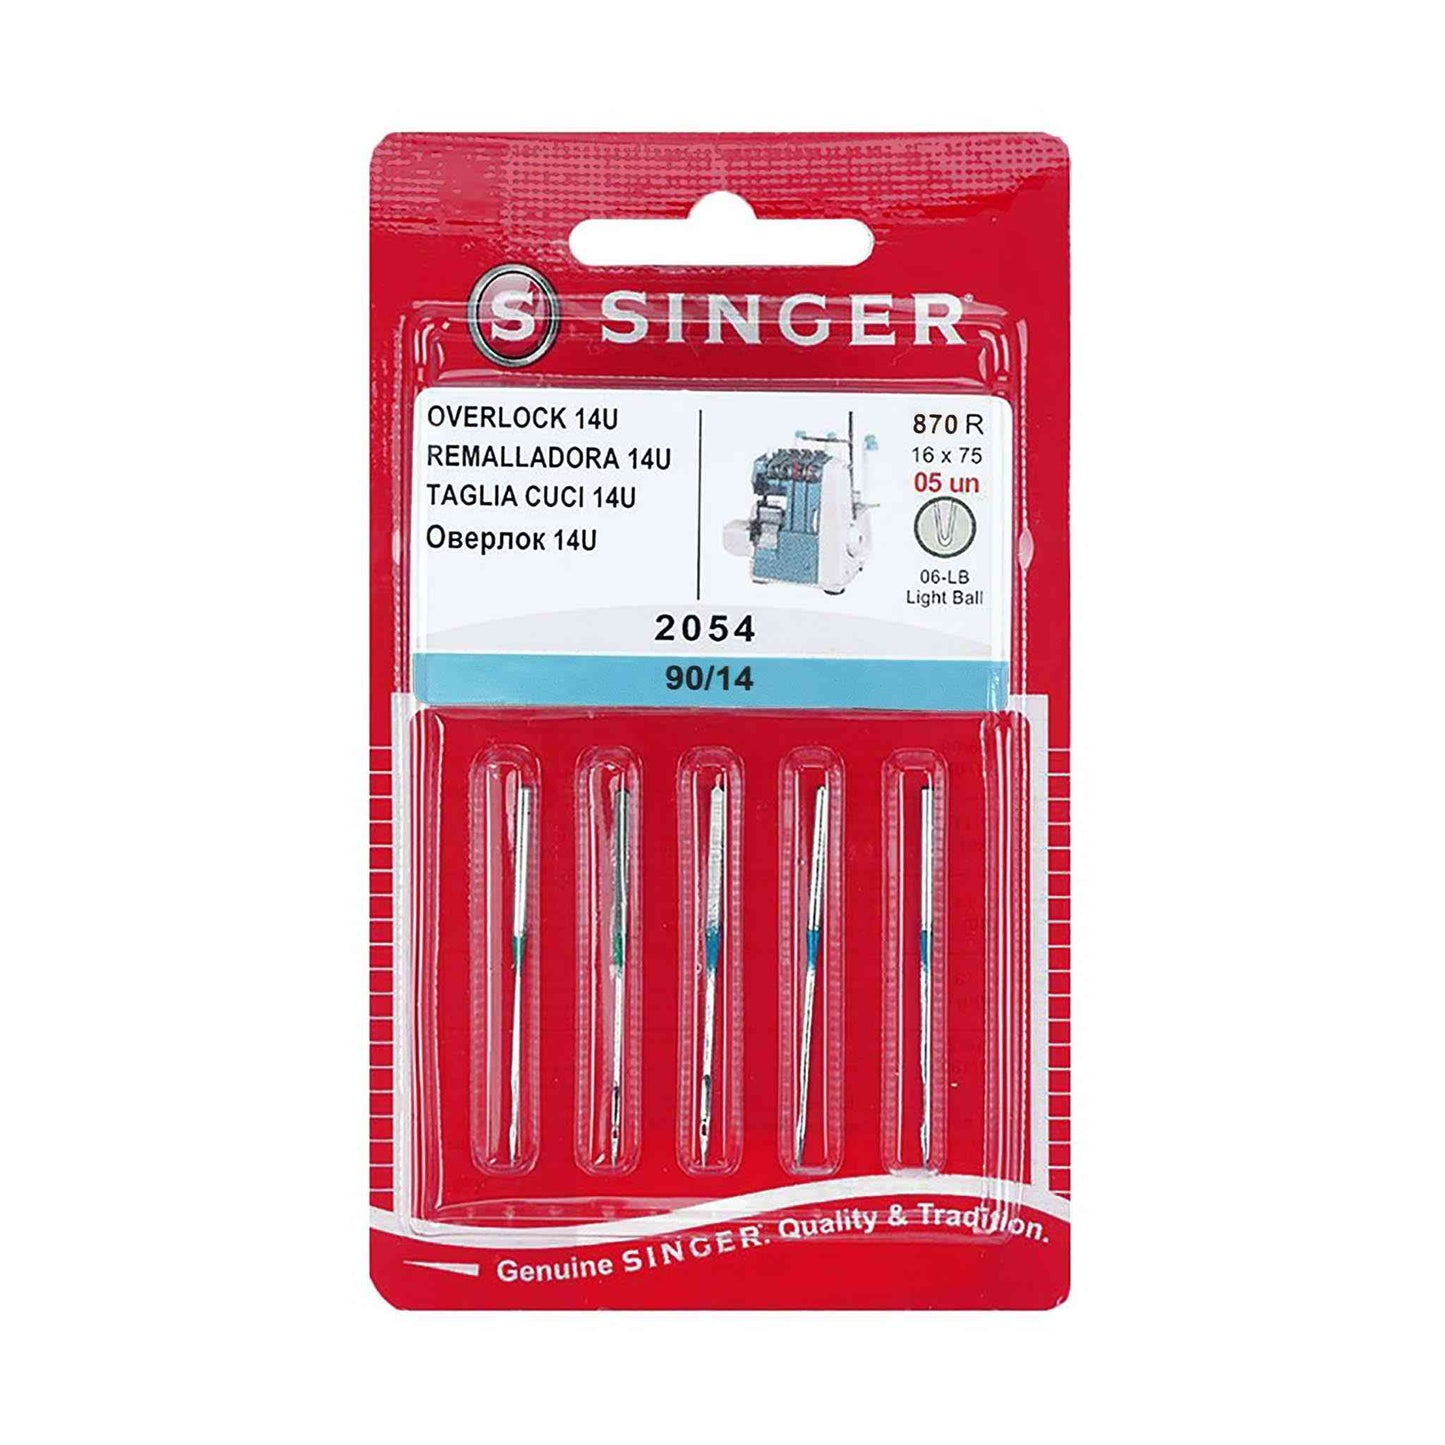 Singer sewing needle reference : r/sewing